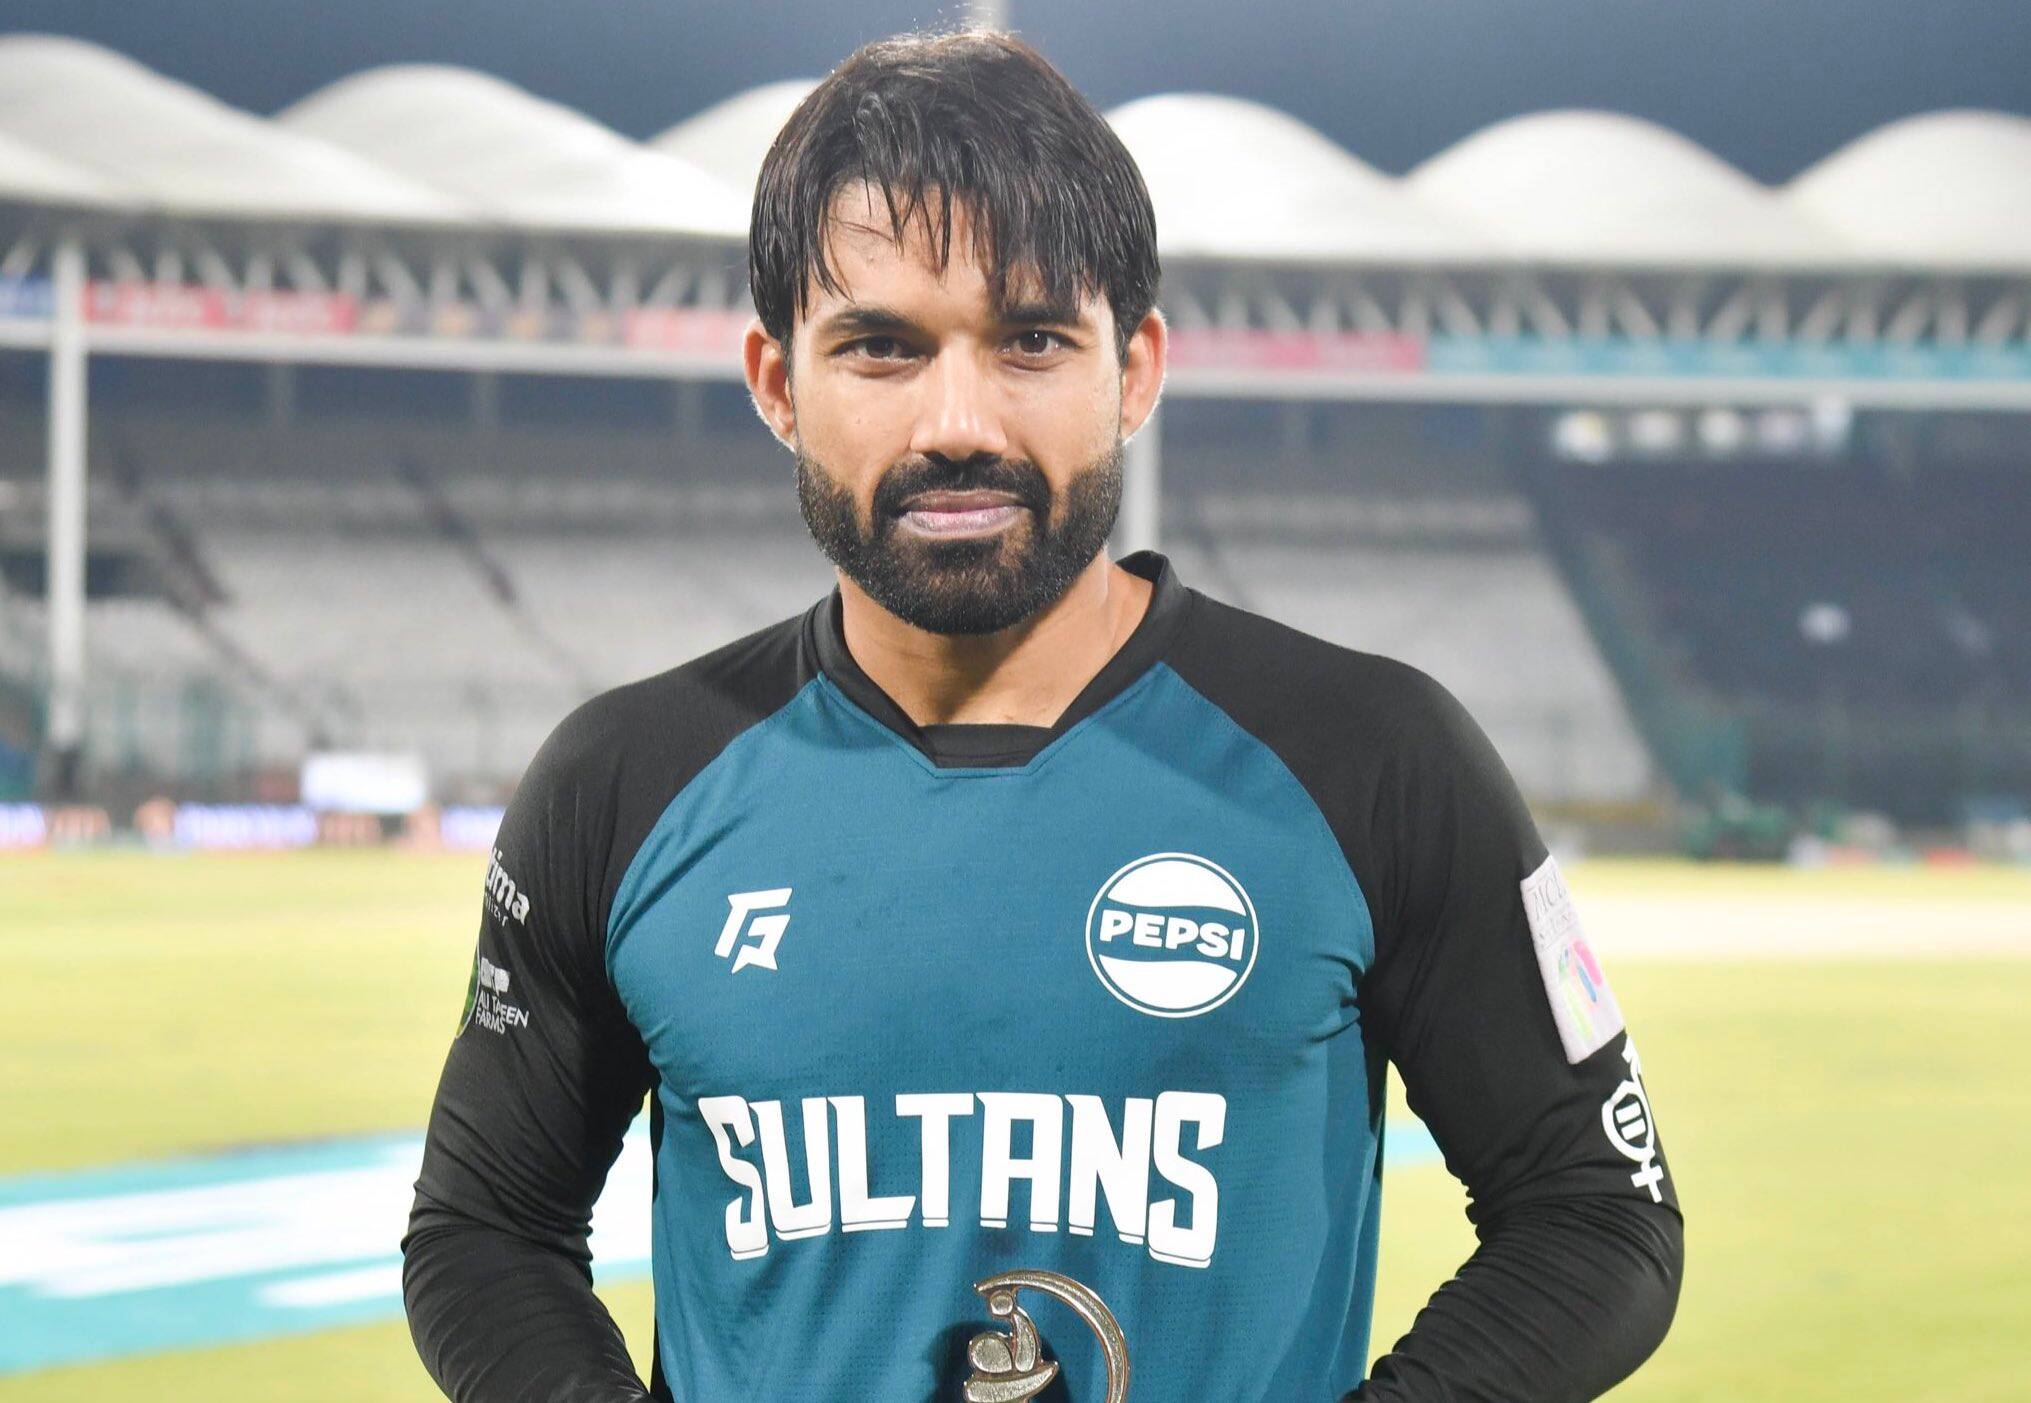 Mohammad Rizwan has been in good form with the bat in this tournament (Source: x.com)